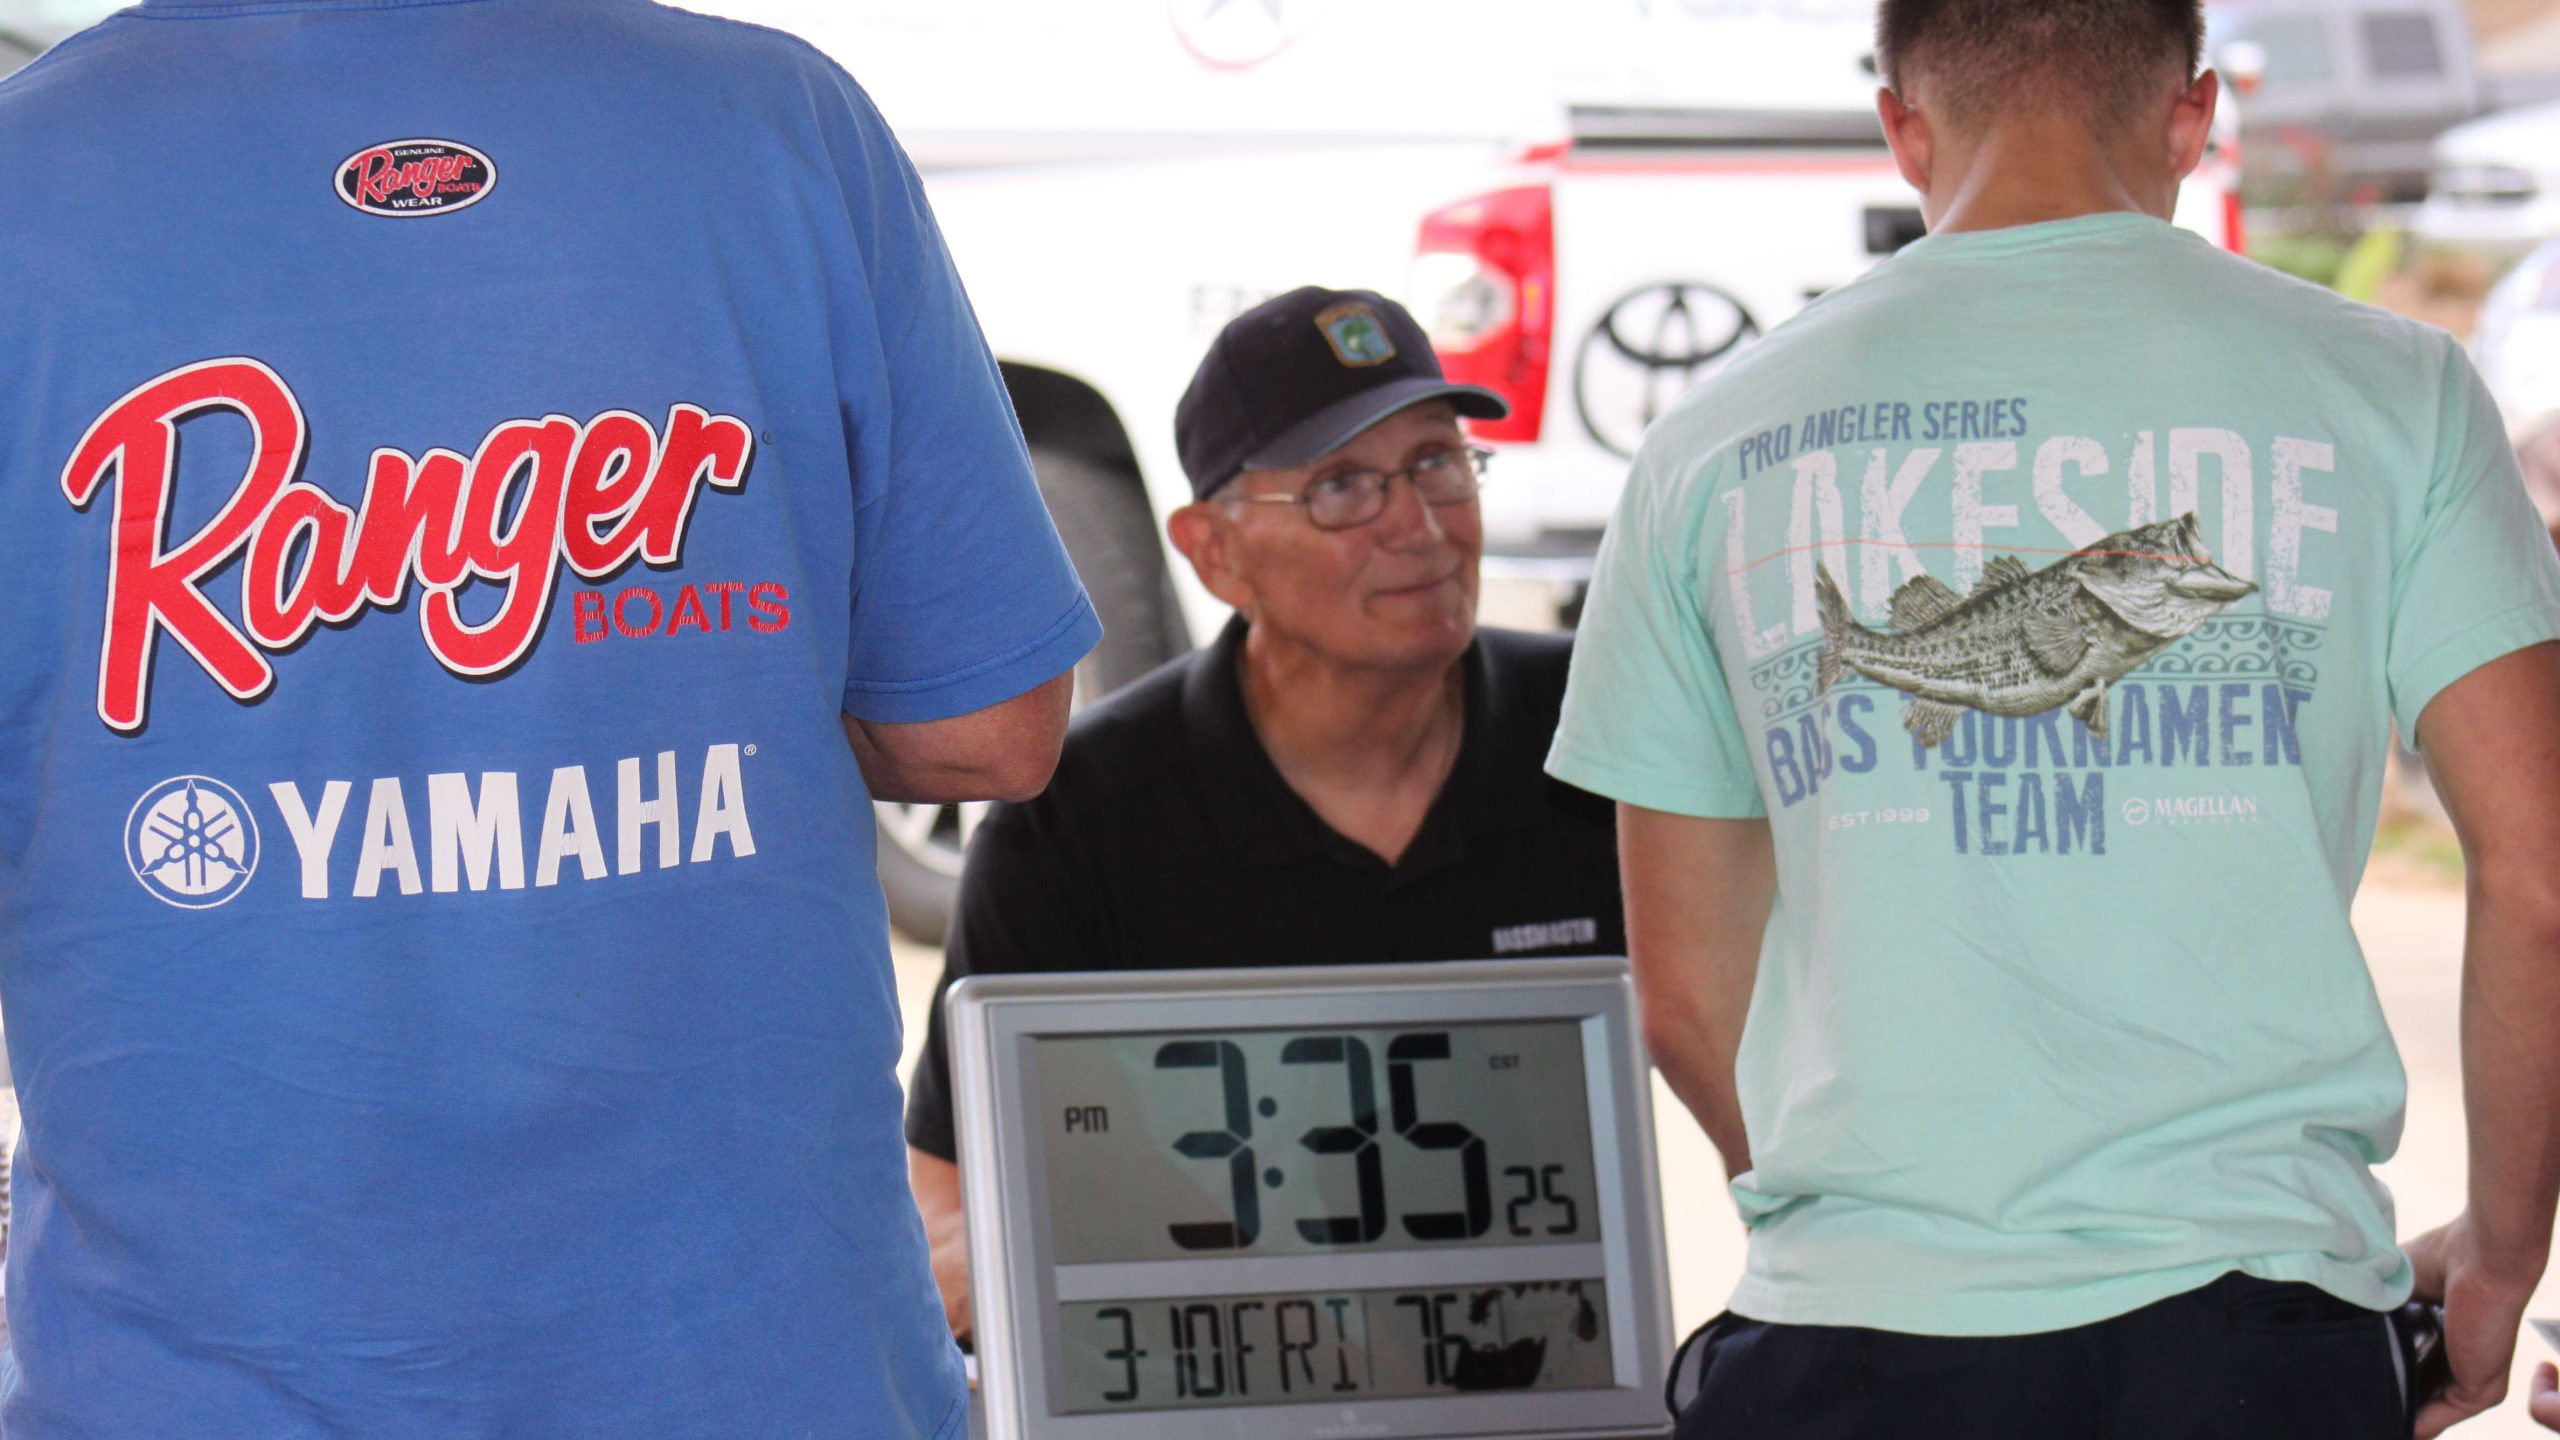 B.A.S.S. worker Ramon Quick talks with some of the anglers
registering on Friday. The ever-present B.A.S.S. clock tells date,
time, and more.